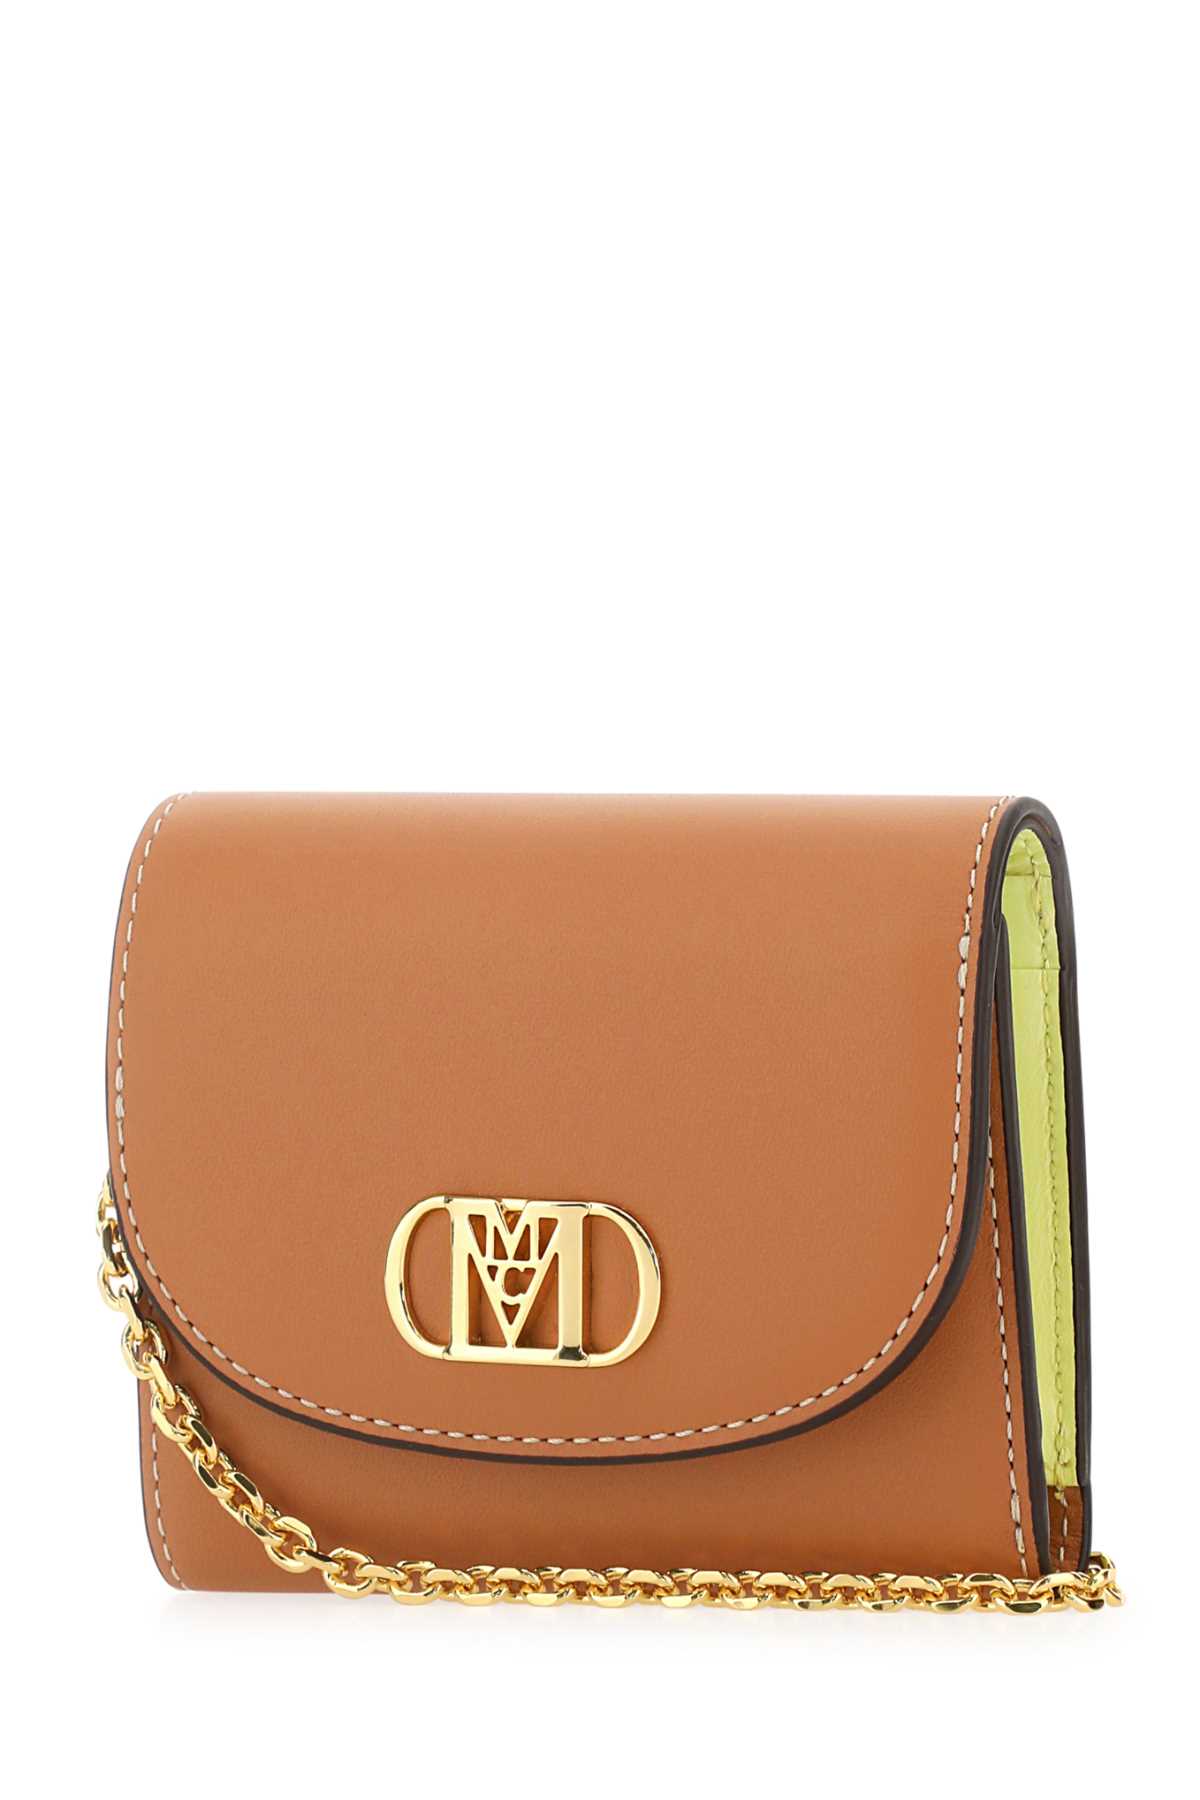 Mcm Caramel Leather Mini Mode Travia Wallet In Co